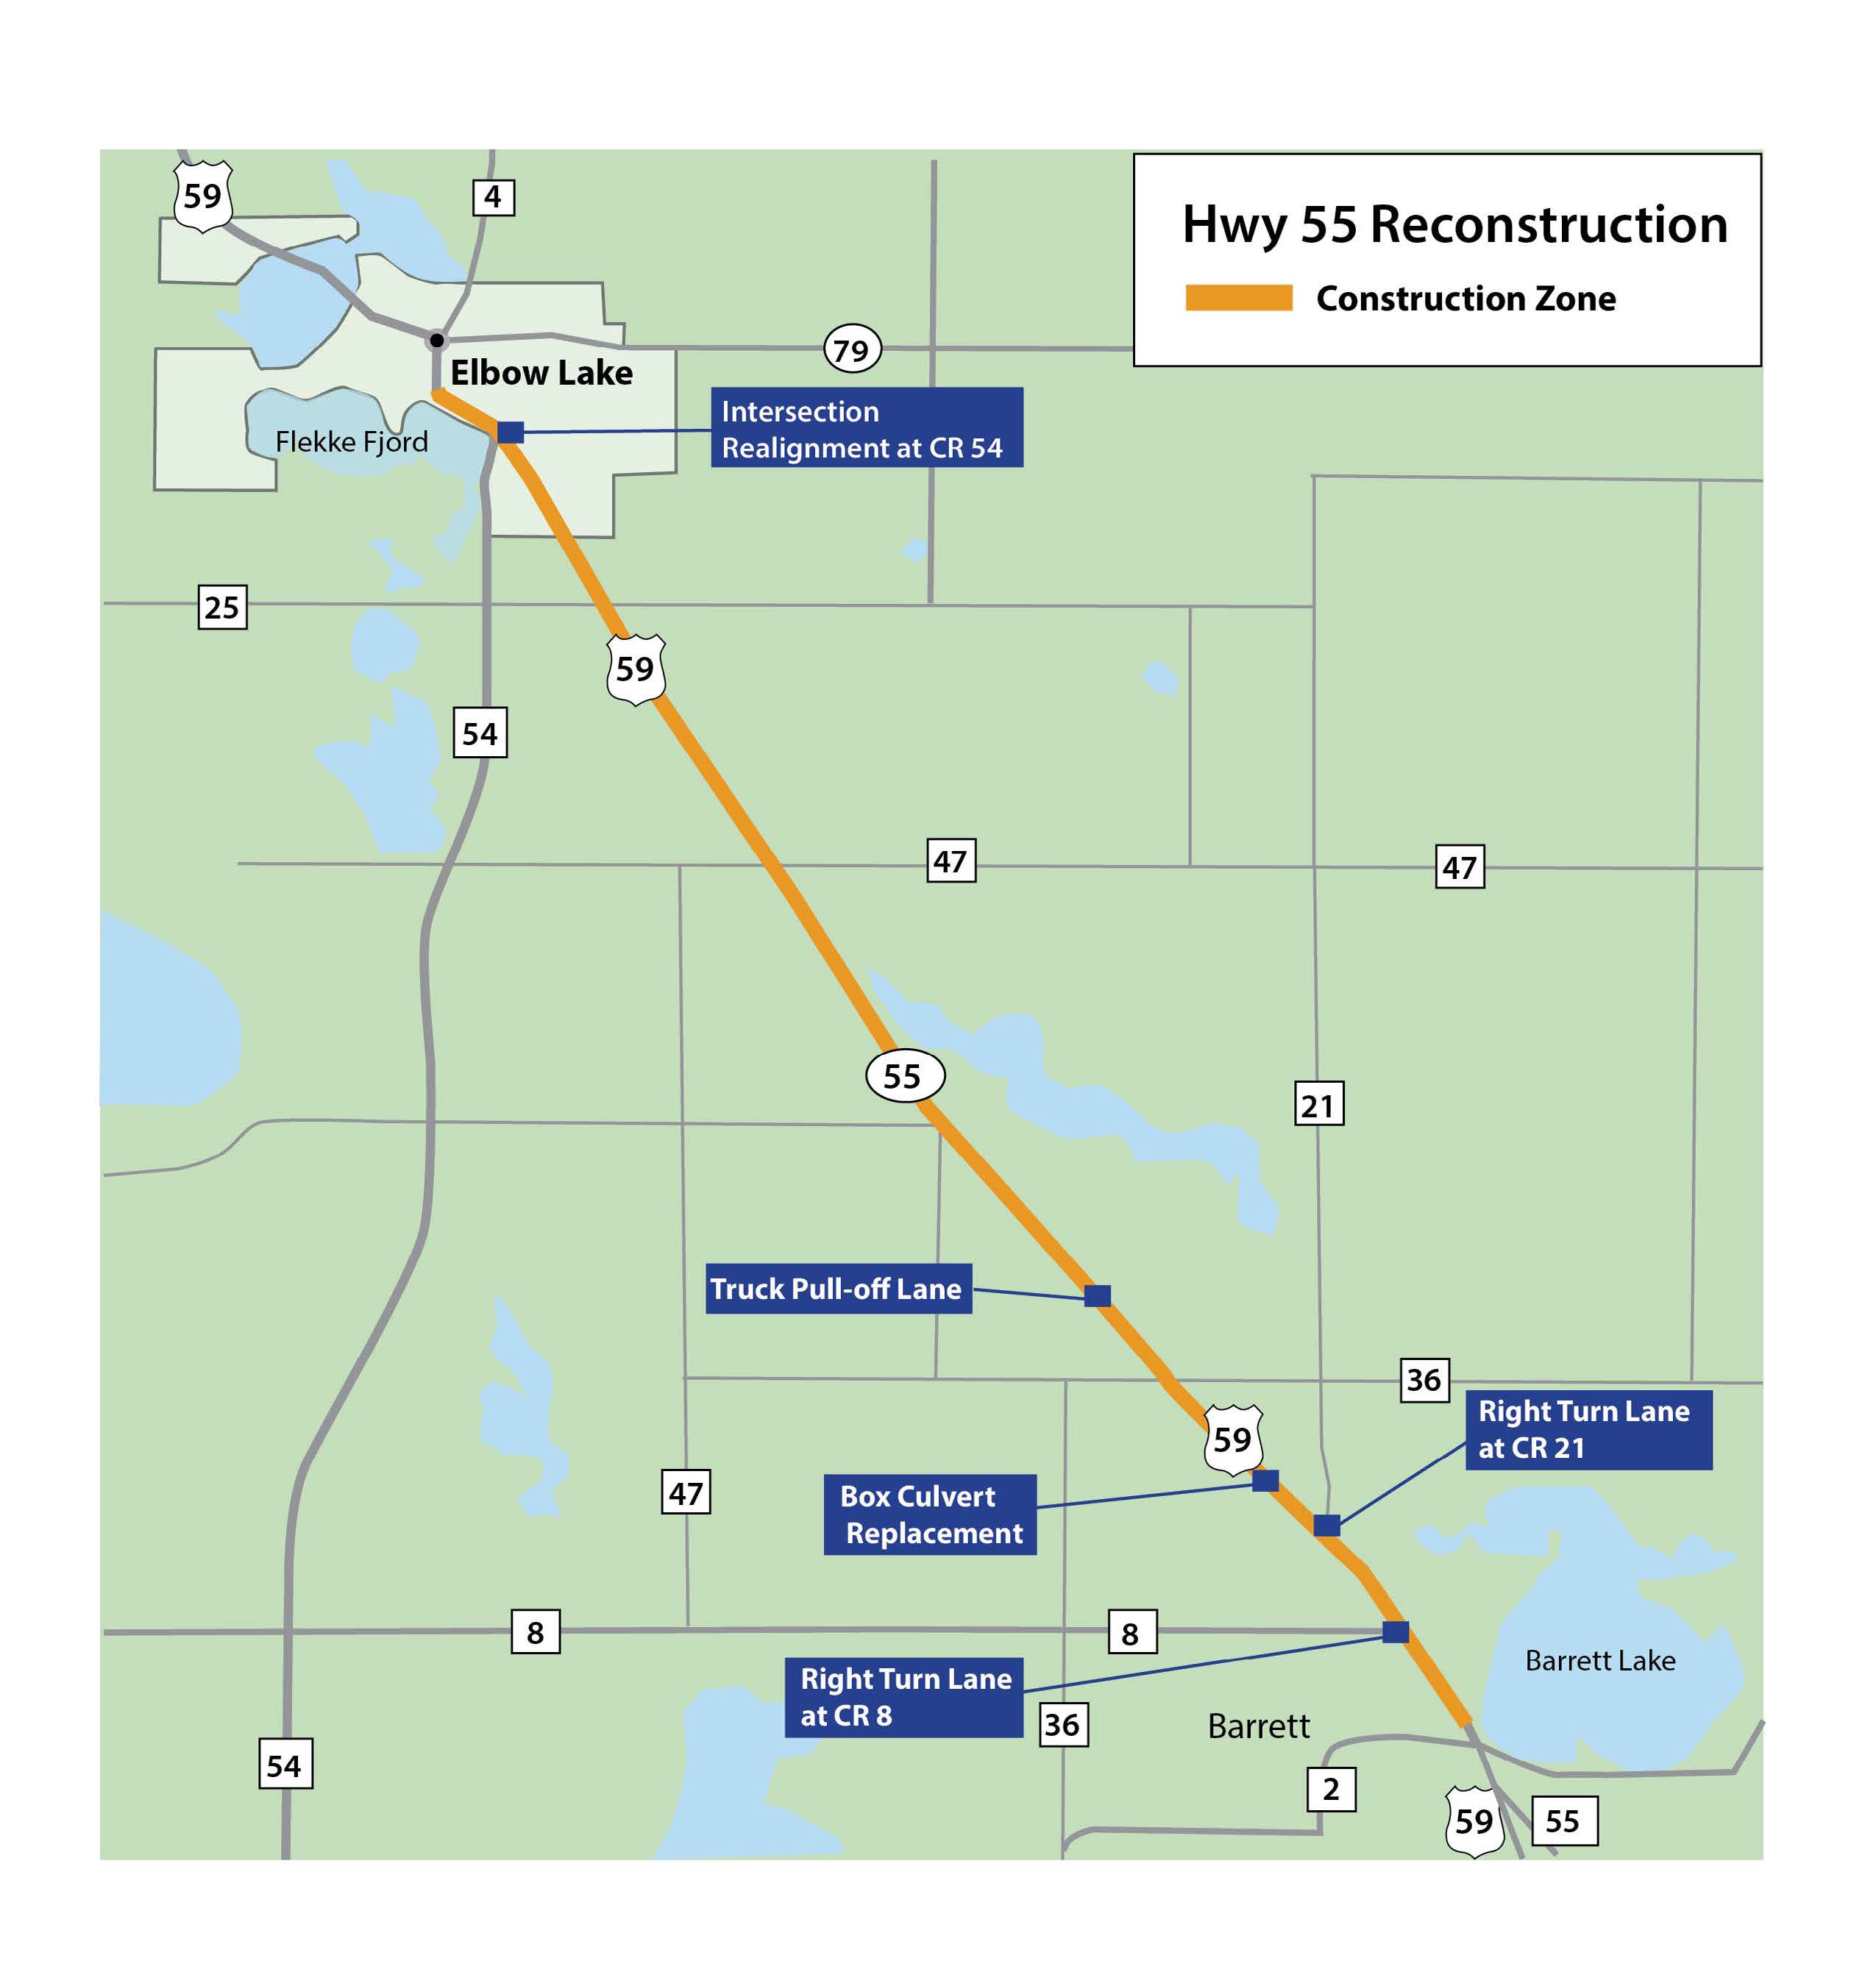 Map shows Highway 55 from Barrett to Hoffman as closed. Traffic is being detoured to Highways 59 and 27. 